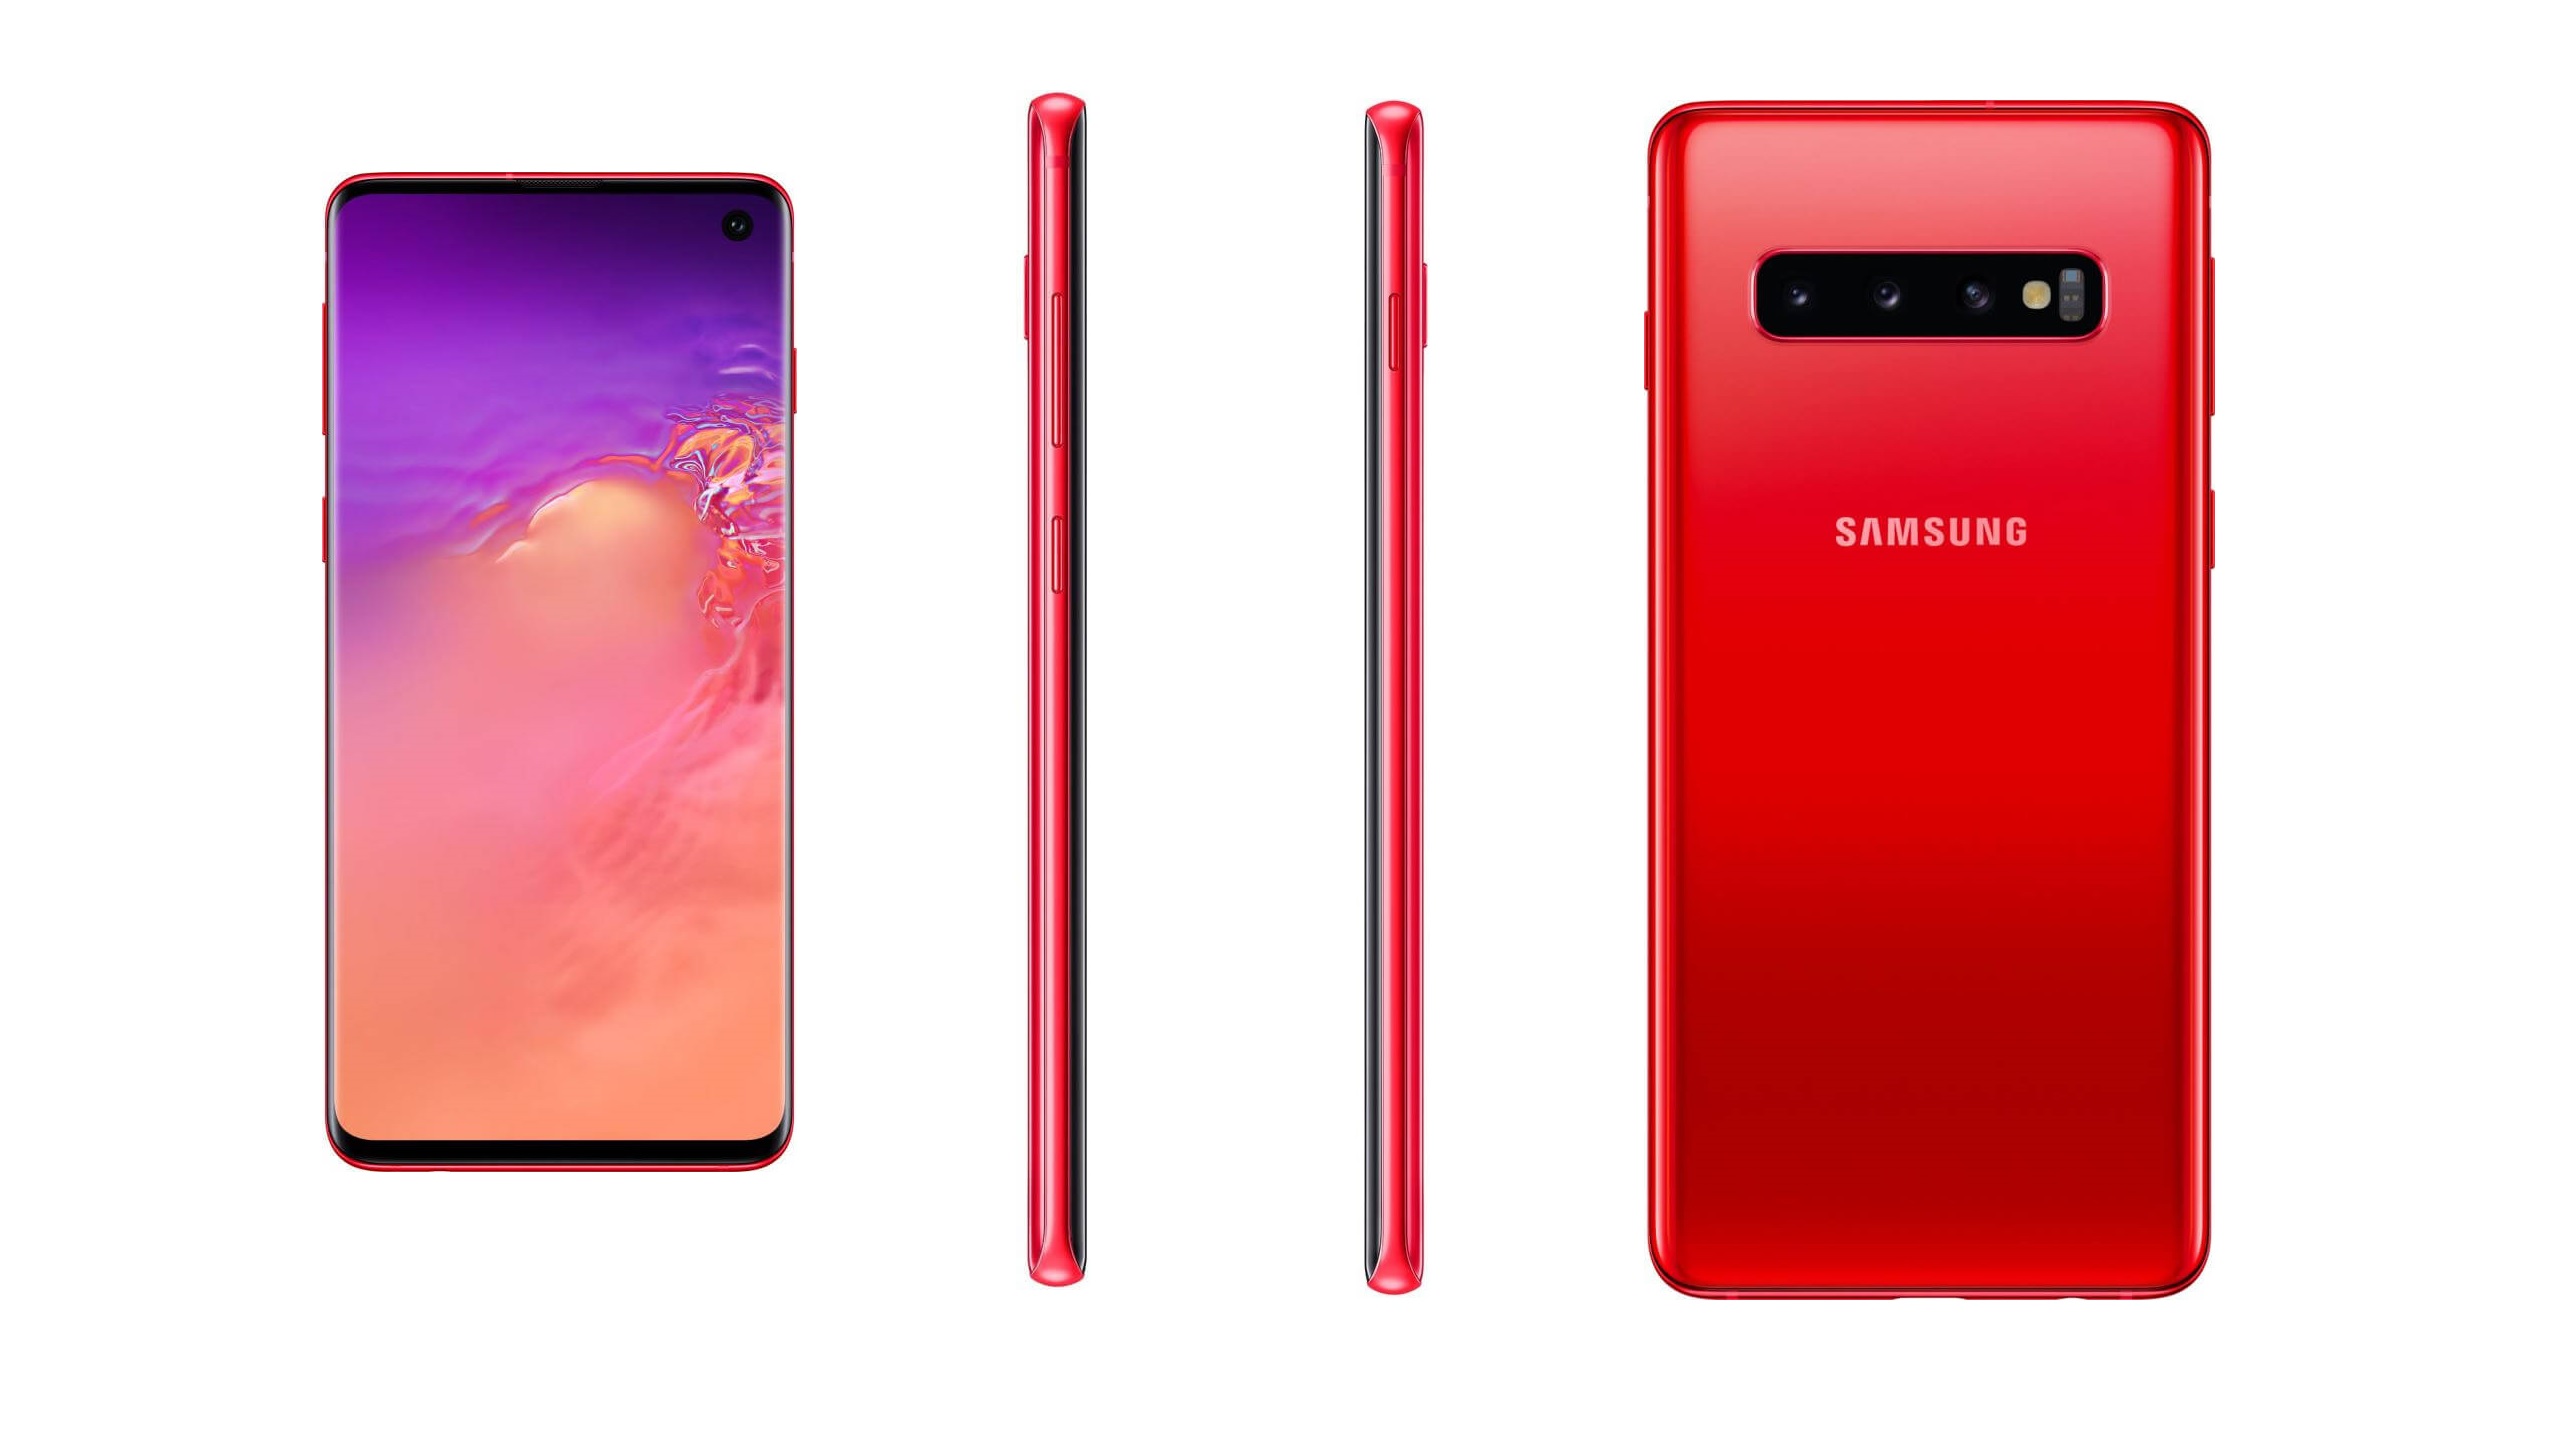 Samsung Galaxy S10 and S10+ to come in new Cardinal Red variant -